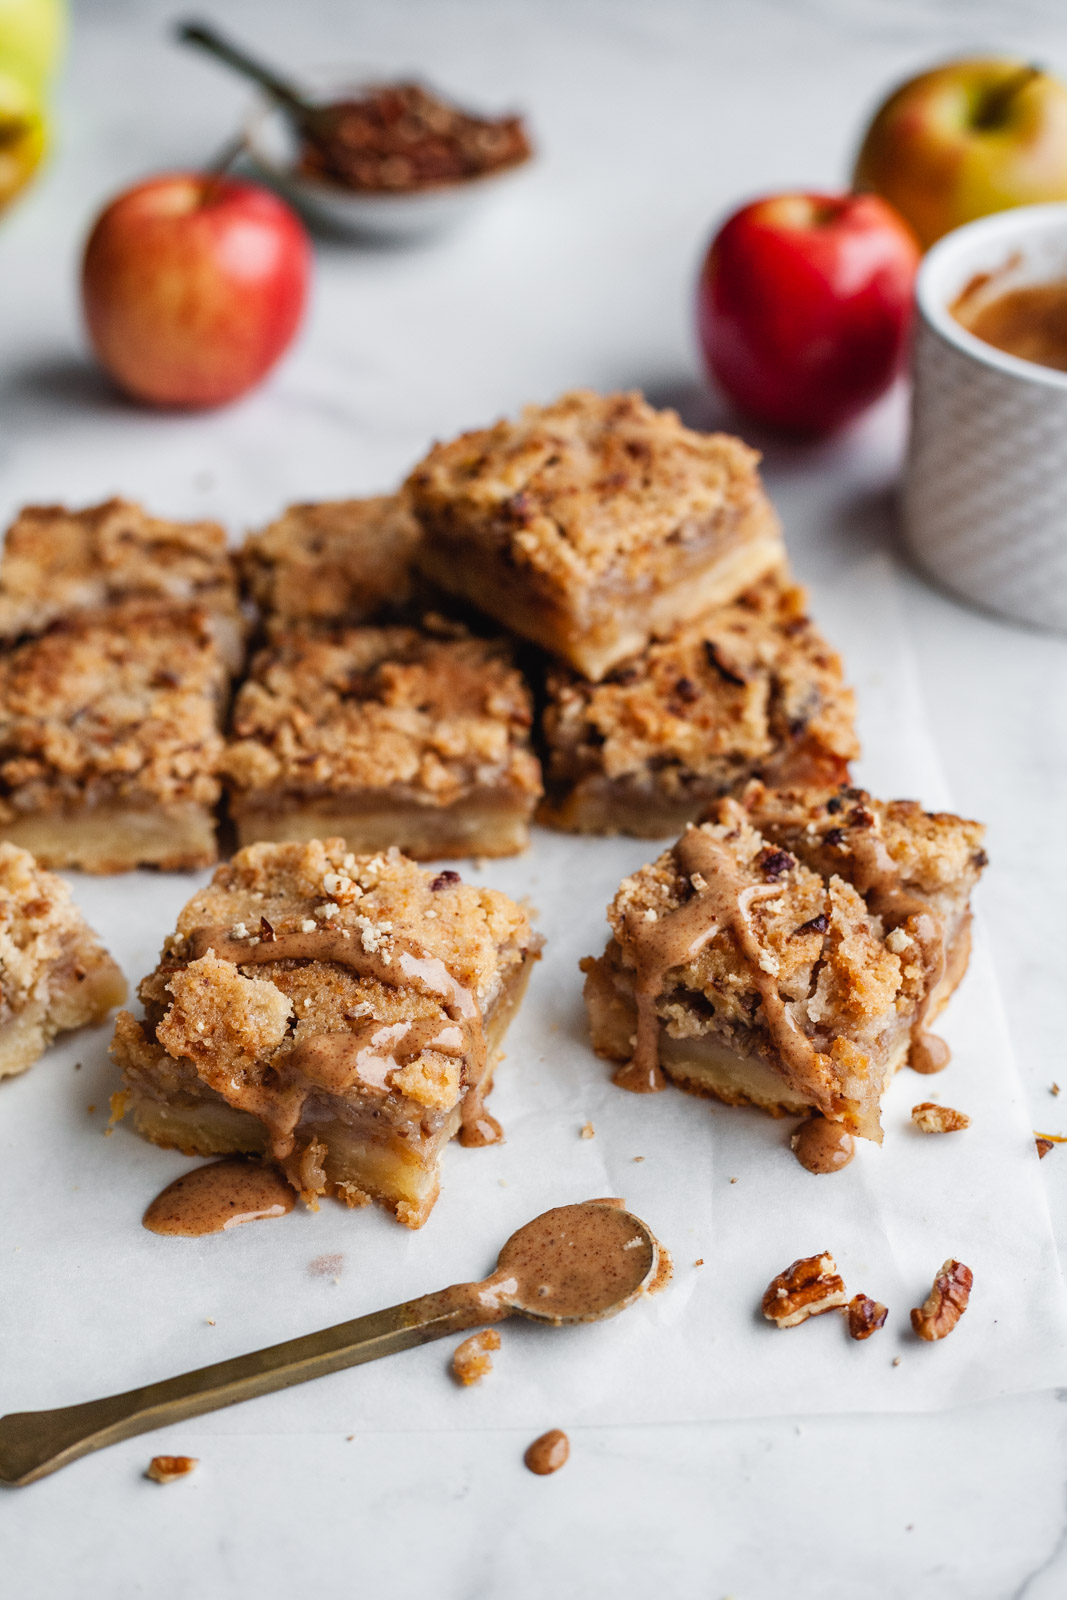 Apple Kuchen Bars With A Spiced Salted Pecan Caramel | Olive & Mango